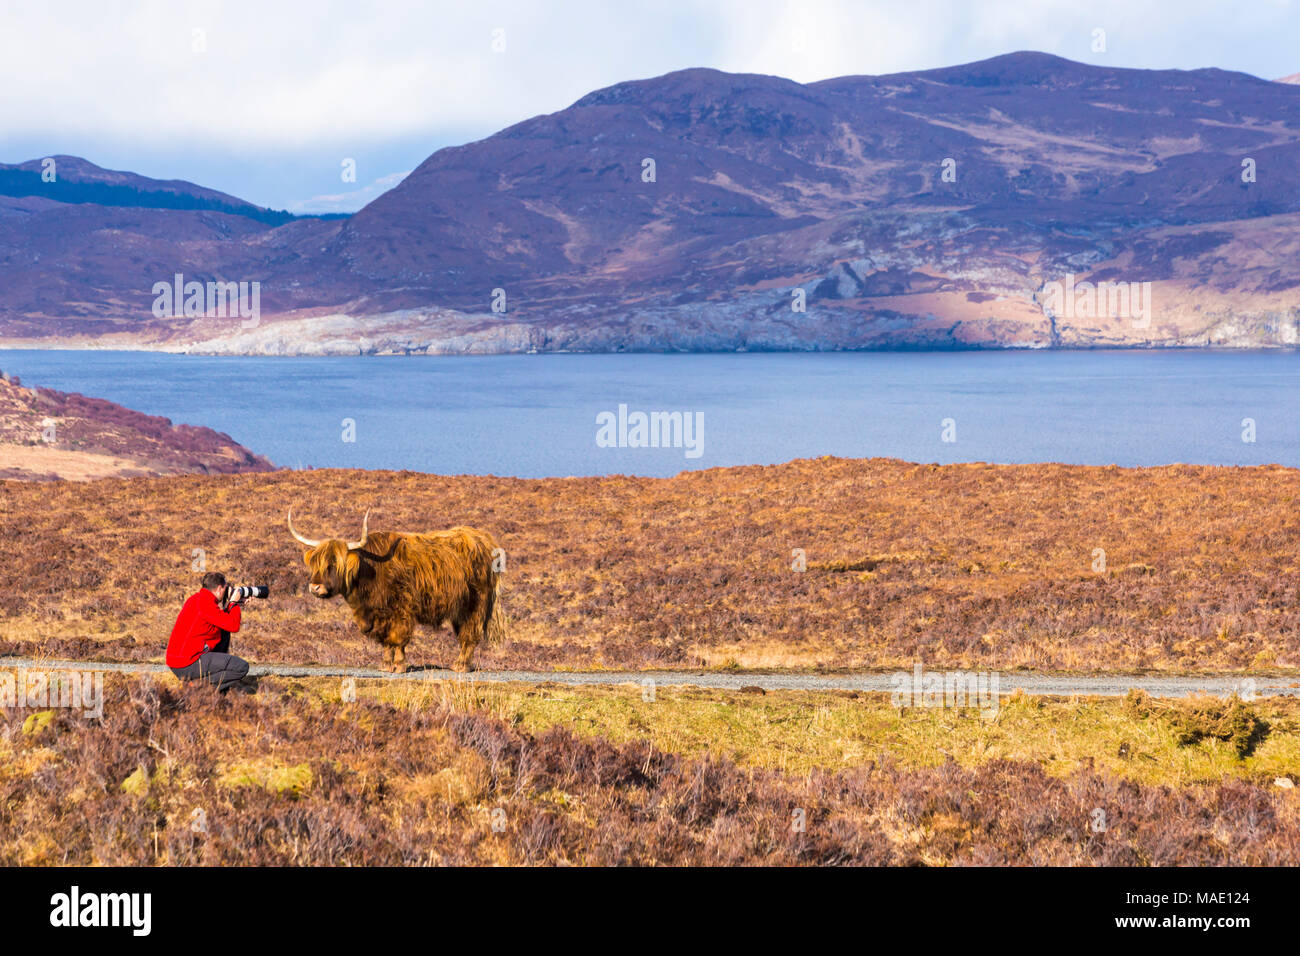 Tourist taking photo of Highland cattle cow in landscape on Isle of Skye, Scotland, UK in March Stock Photo